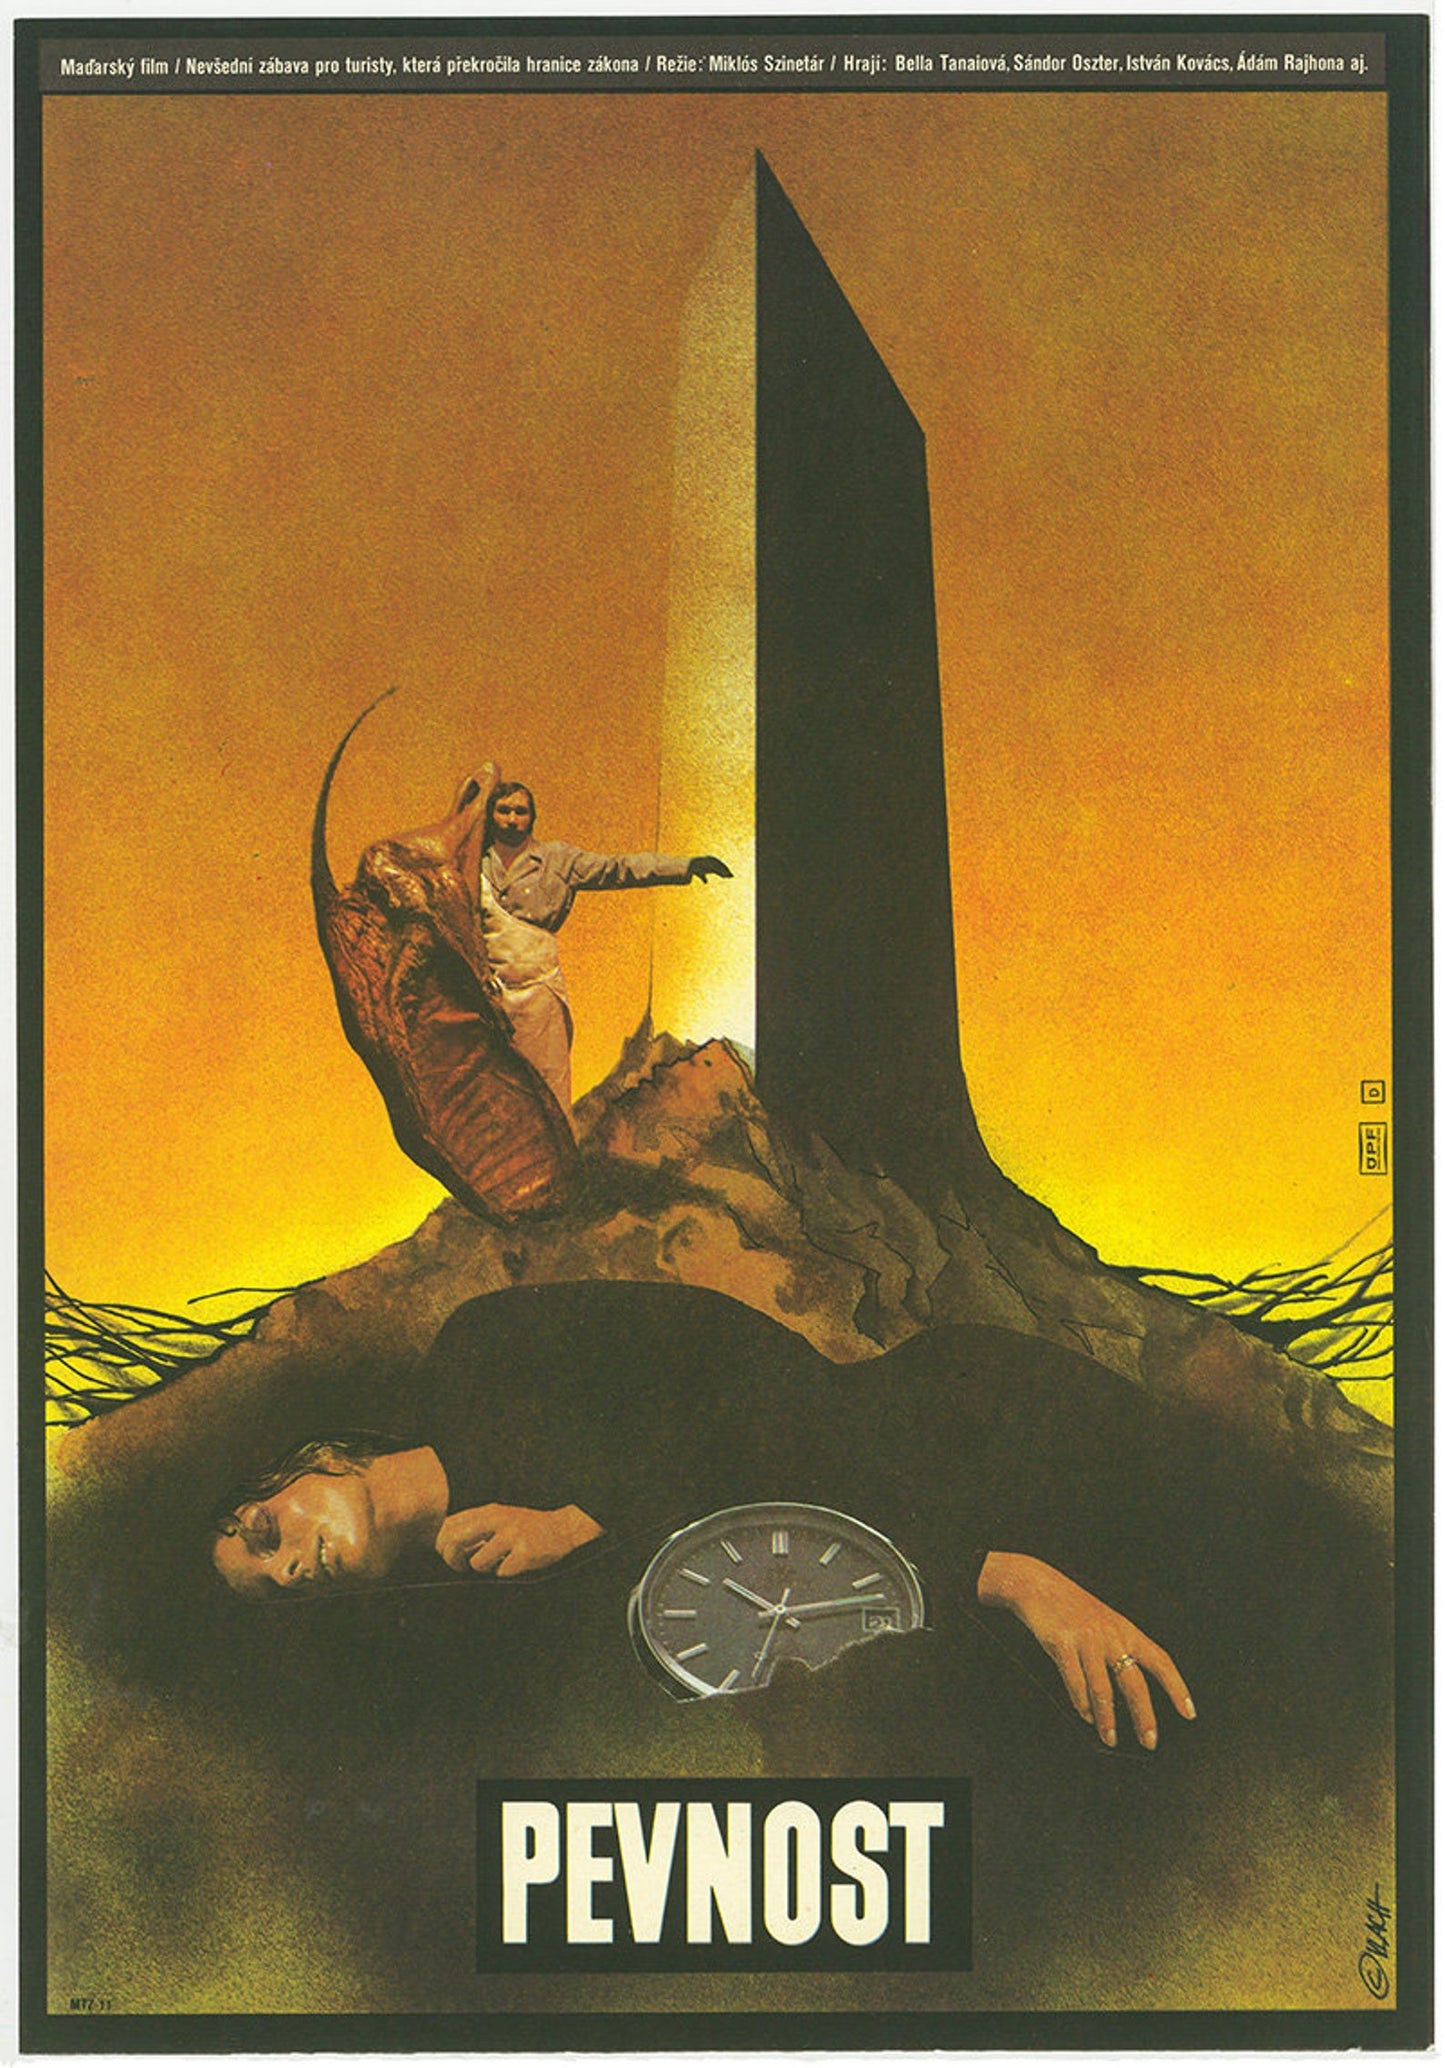 Surreal Film Poster from Czechoslovakia for Hungarian Movie "The Fortress" 1980, Signed by designer Zdenek Vlach